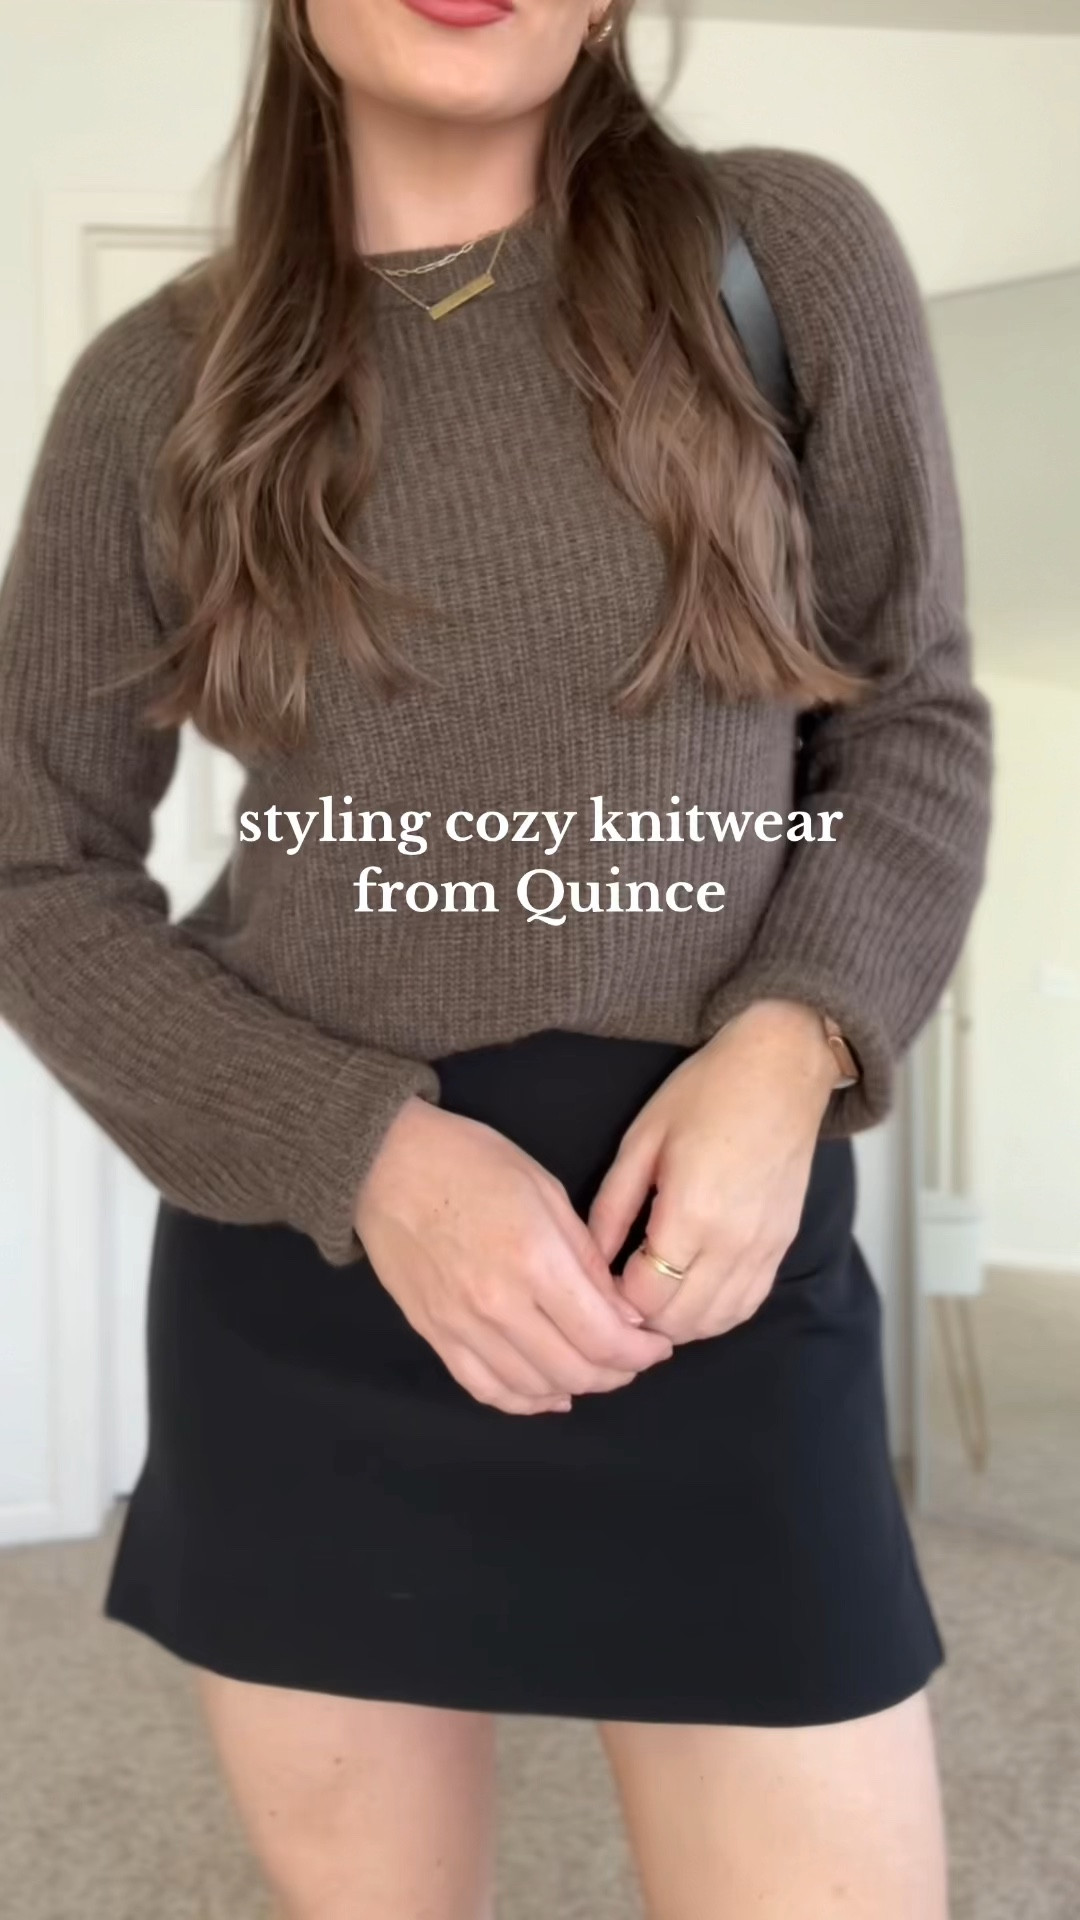 Yellow Quince Knitwear for Women